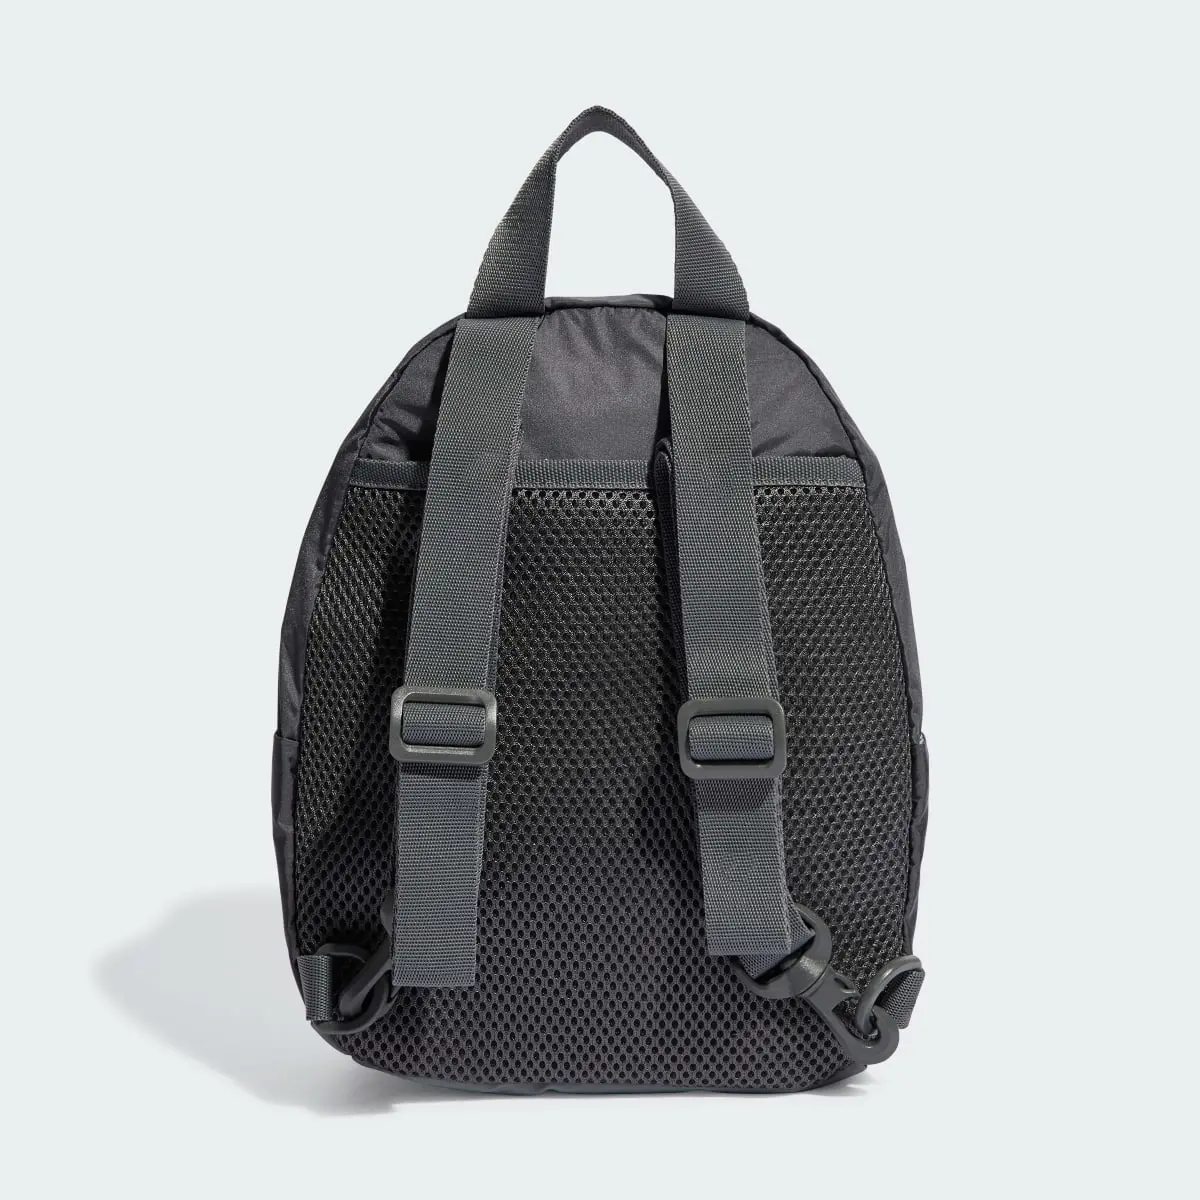 Adidas Classic Gen Z Backpack Extra Small. 3